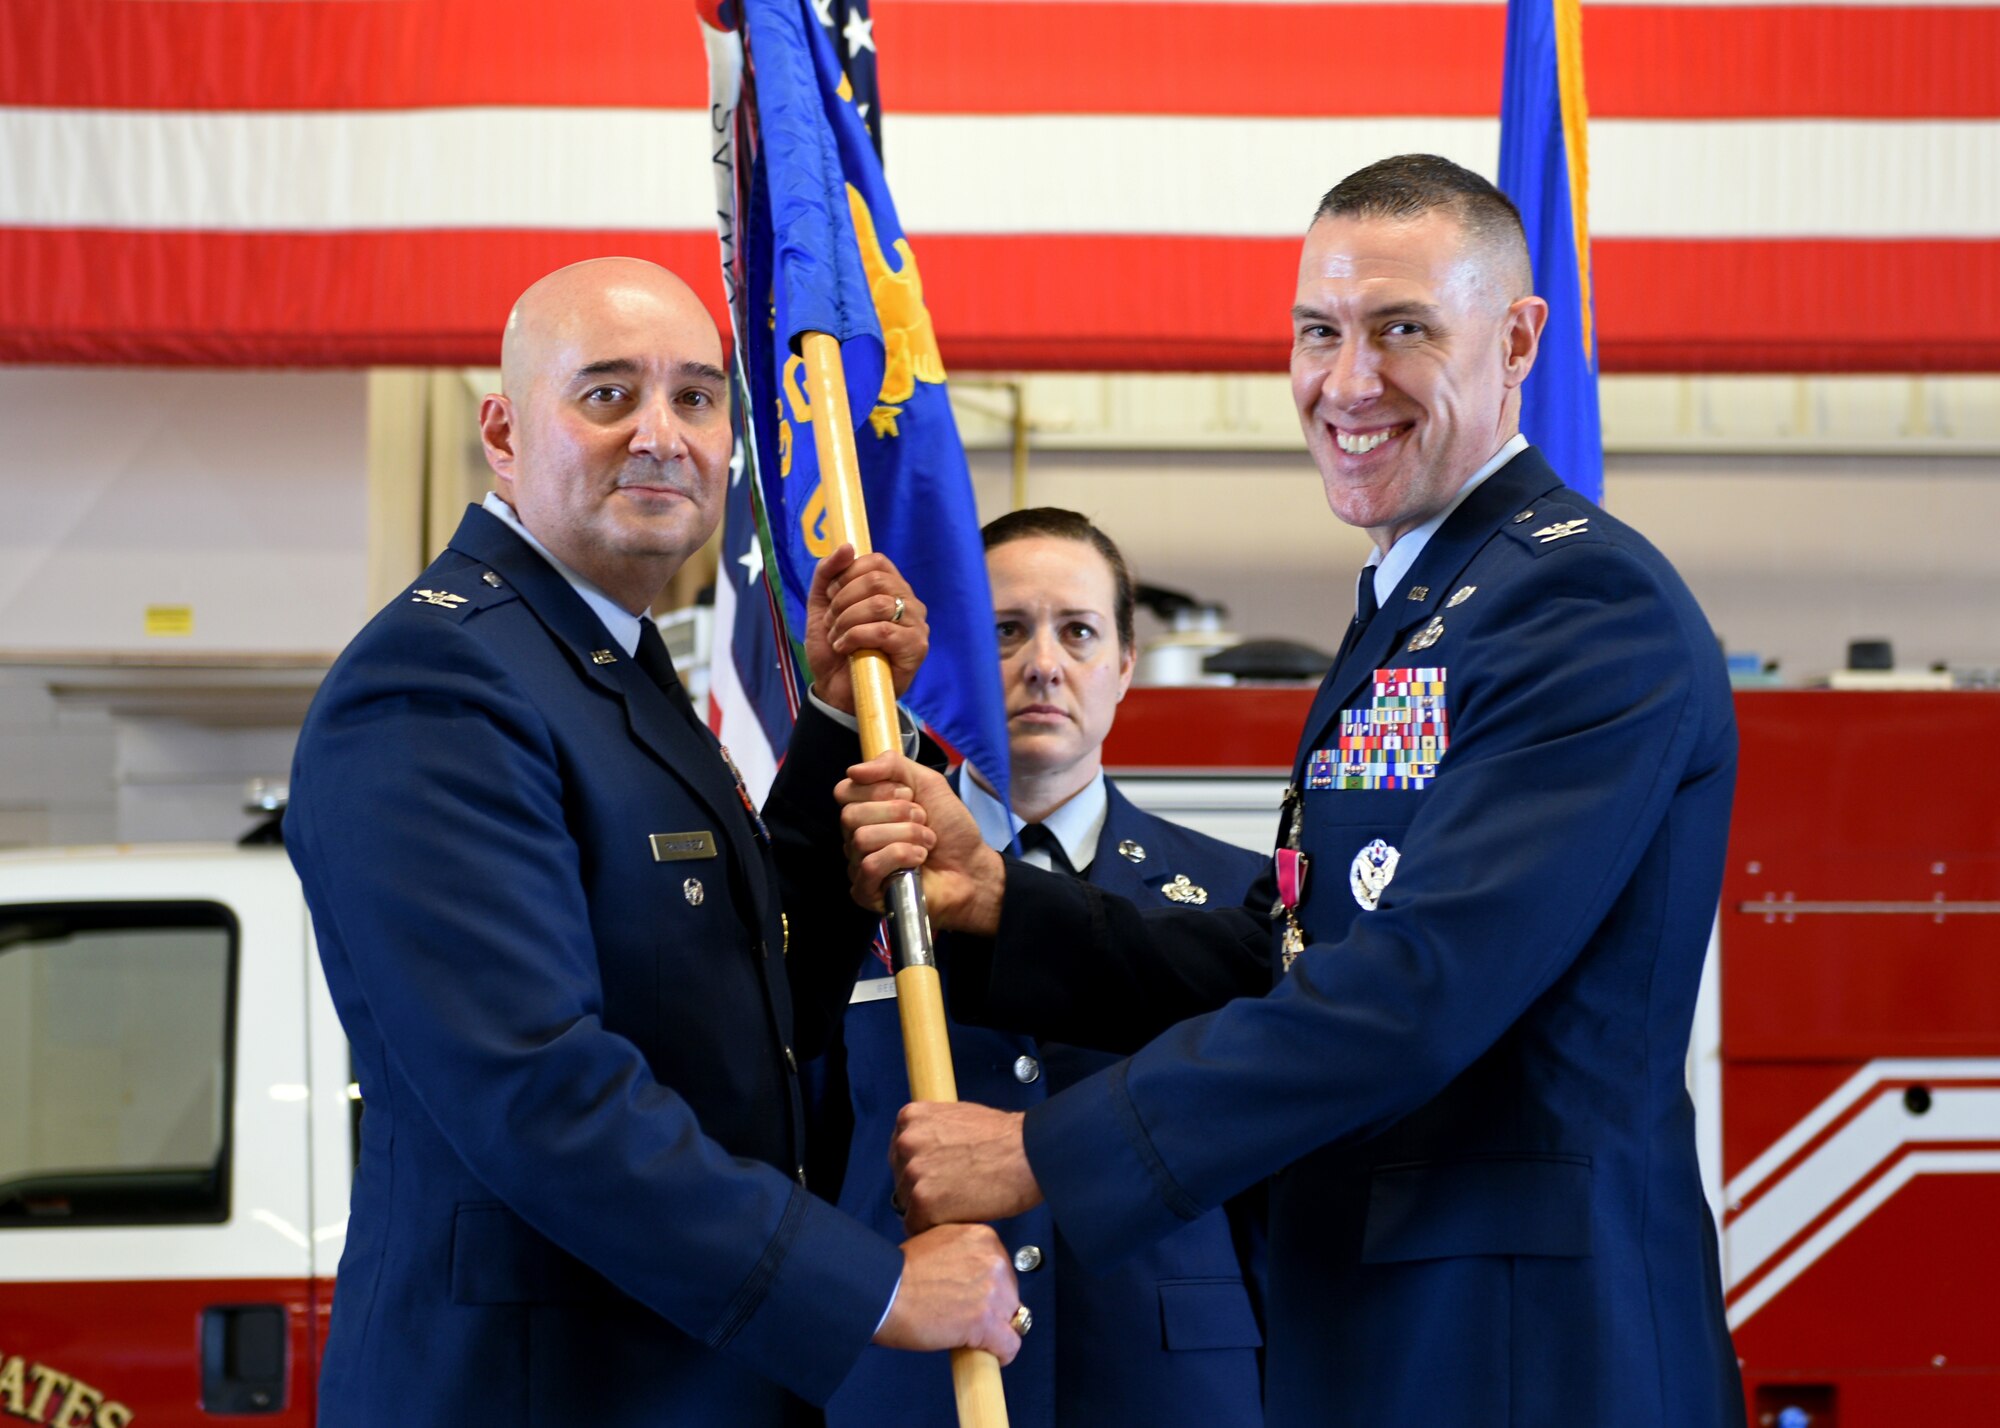 U.S. Air Force Col. Robert Ramirez, 17th Training Wing vice commander, accepts the guidon from Col. Jason Beck, 17th Mission Support Group outgoing commander, during the change of command ceremony at the Transportation Complex on Goodfellow Air Force Base, Texas, June 20, 2019. The 17th MSG sustains the Air Force’s largest sensitive compartmented information facility complex, the Louis F. Garland Joint Fire Protection Training Academy, over 3,000 dormitory rooms, and a food service program generating over a million meals per year. (U.S. Air Force photo by Airman 1st Class Robyn Hunsinger/Released)